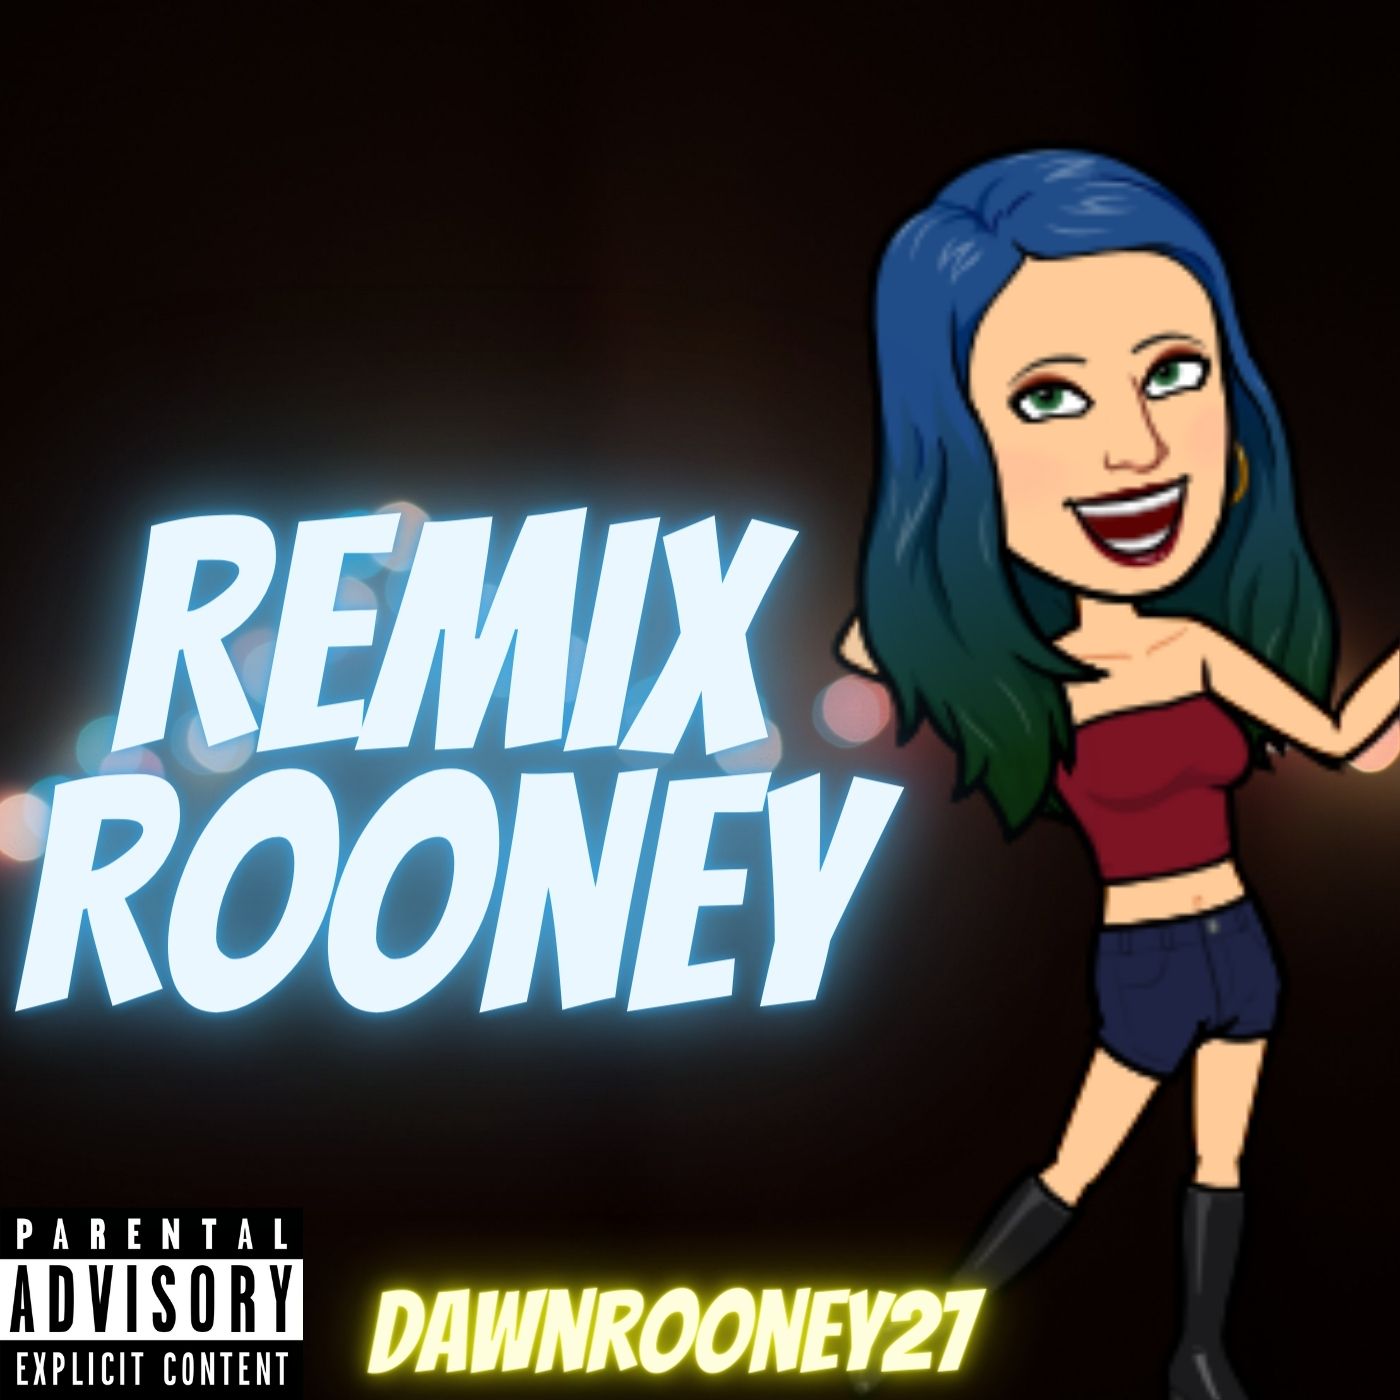 DawnRooney27, anna oop, Lilly Singh, & T-Pain featuring Epic Rap Battles of History — Wonder Reveal cover artwork